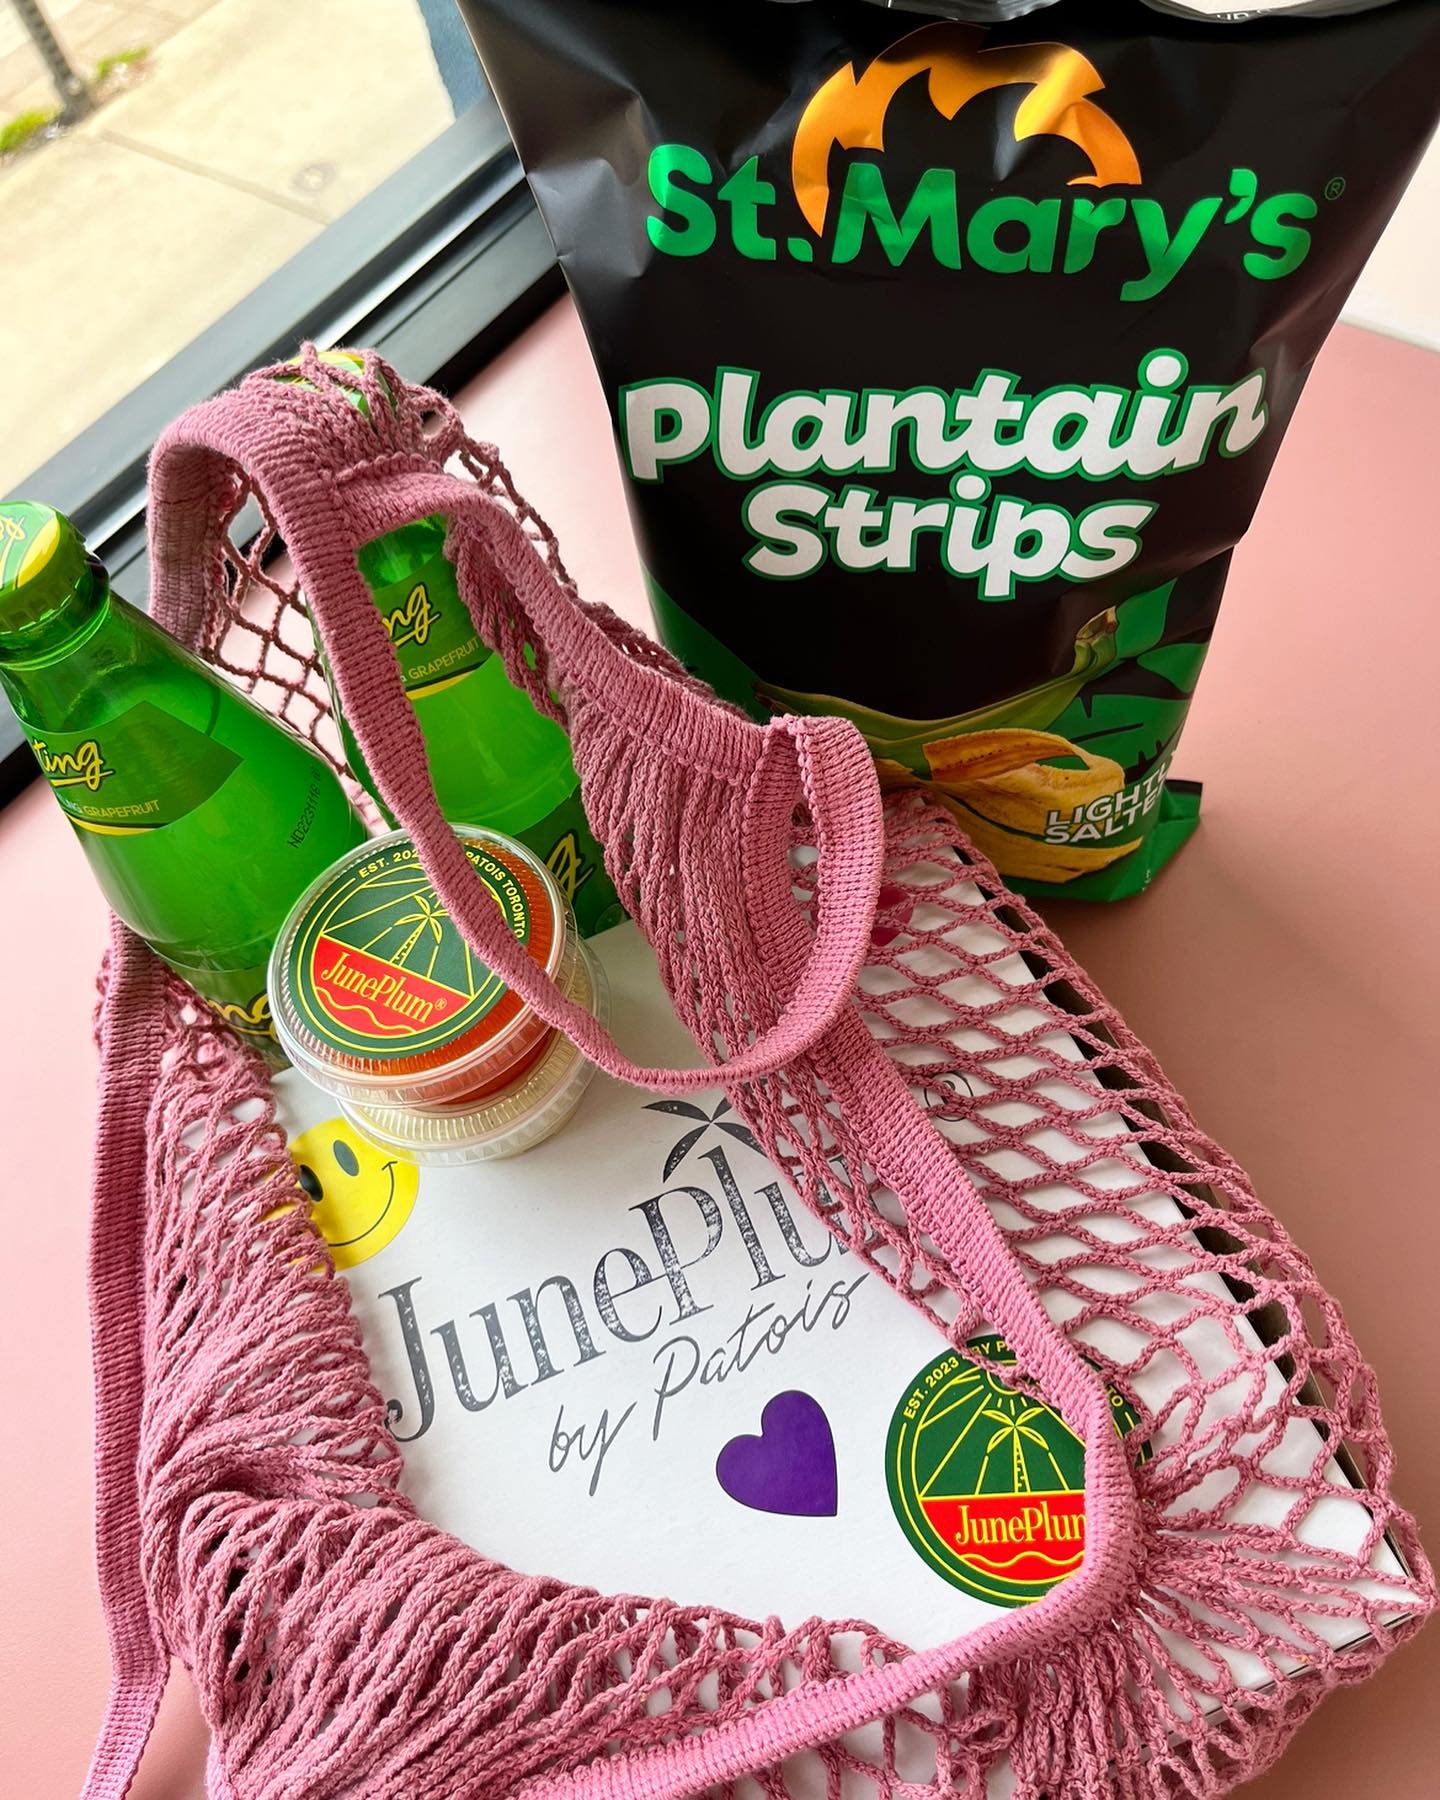 Picnic HAUL ❤️

Pick up treats for your weekend spring picnic! Stop on by or order for delivery via UberEats 

#juneplumto #pattypicnic #juneplumpatty #jamaicanpatty